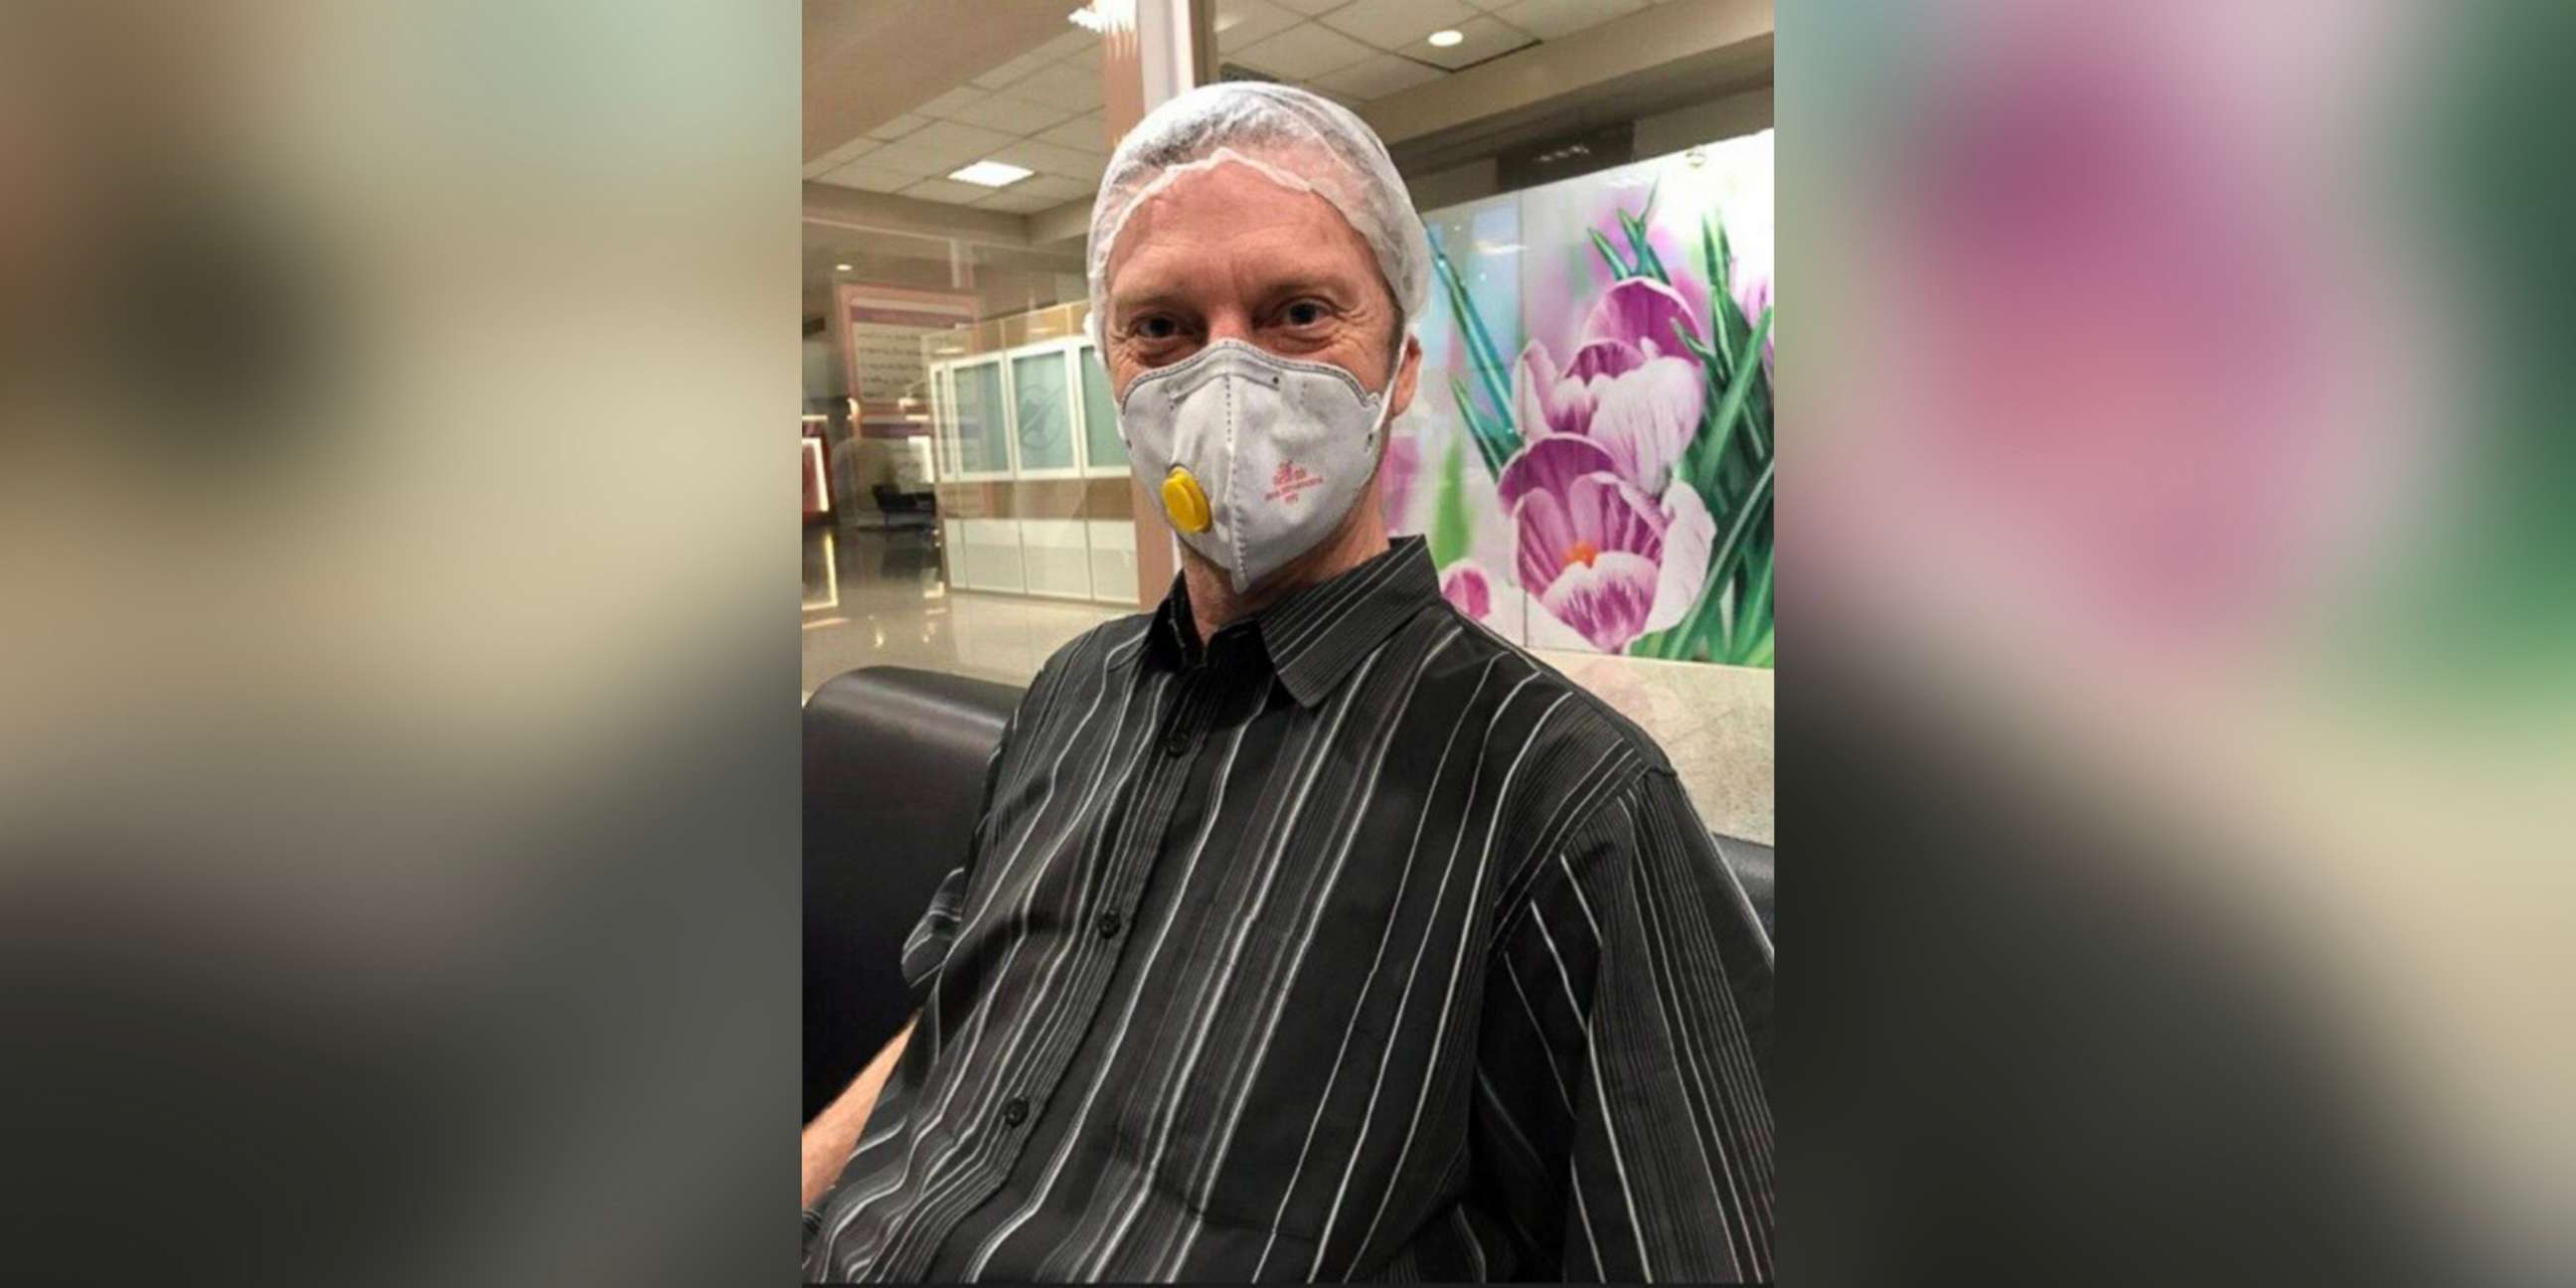 PHOTO: American citizen Michael White, who has been detained by the Iranian government for over 600 days, is seen for the first time after he was granted medical furlough amid the novel coronavirus outbreak, in a photo released by his family.